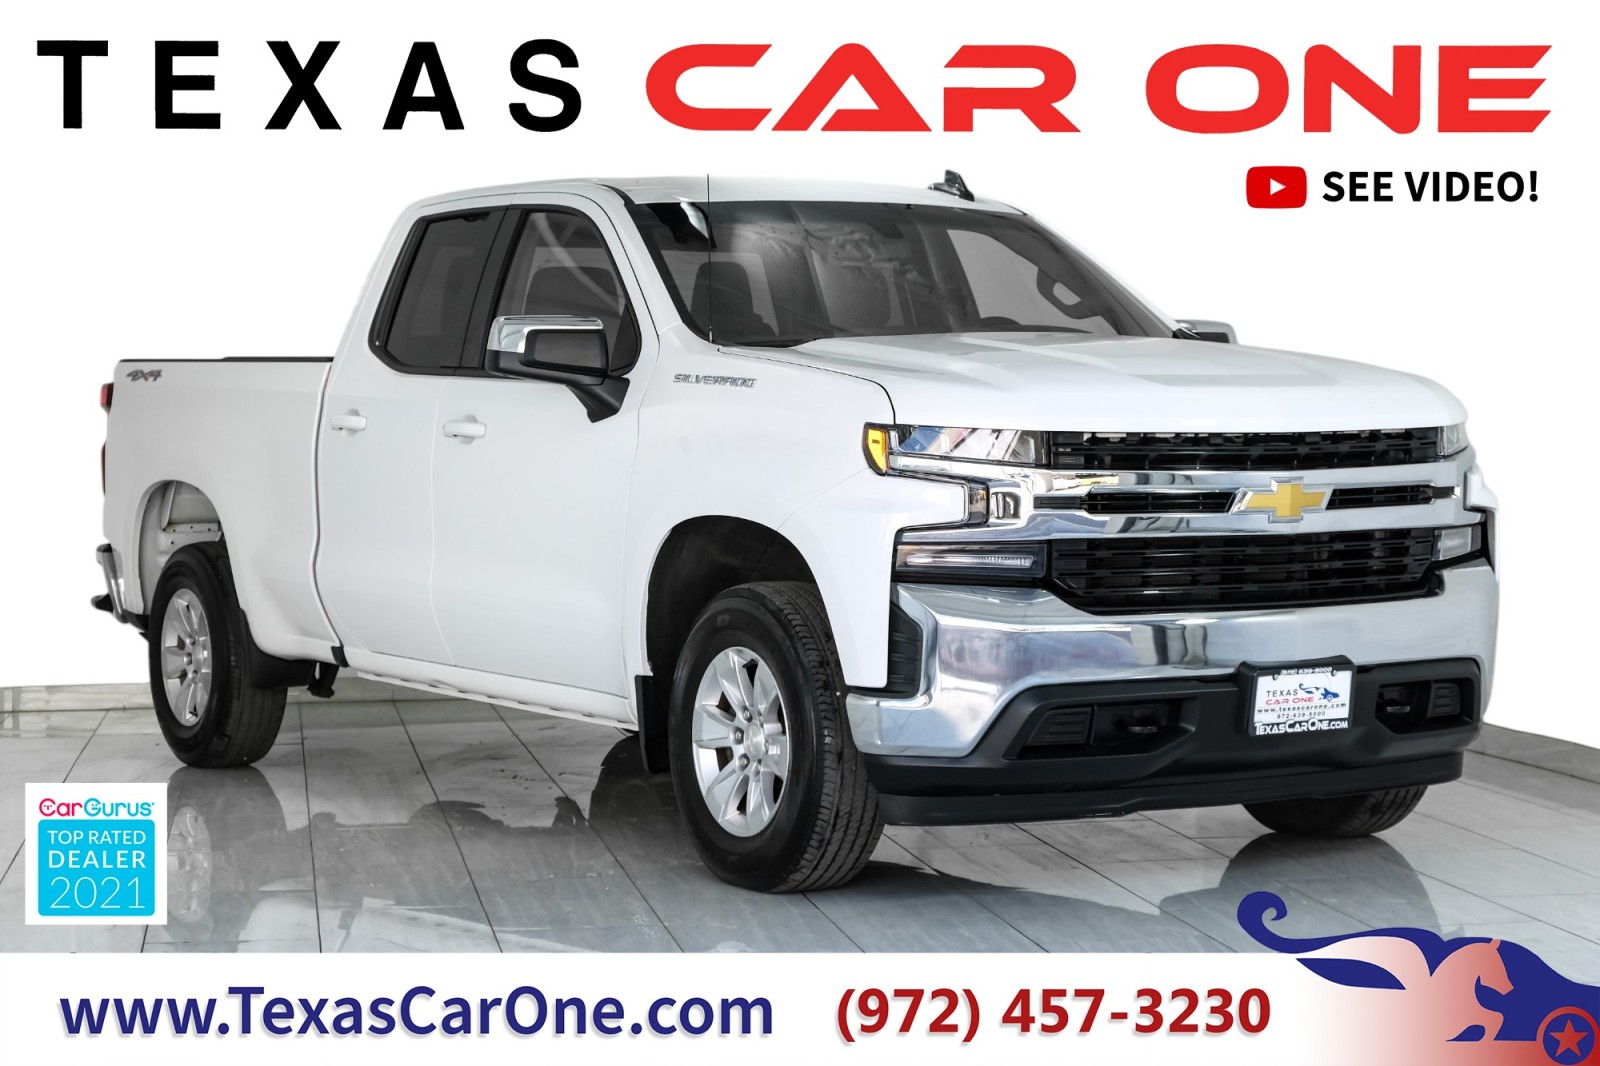 2019 Chevrolet Silverado 1500 LT DOUBLE CAB 4WD AUTOMATIC HEATED SEATS REAR CAME 1